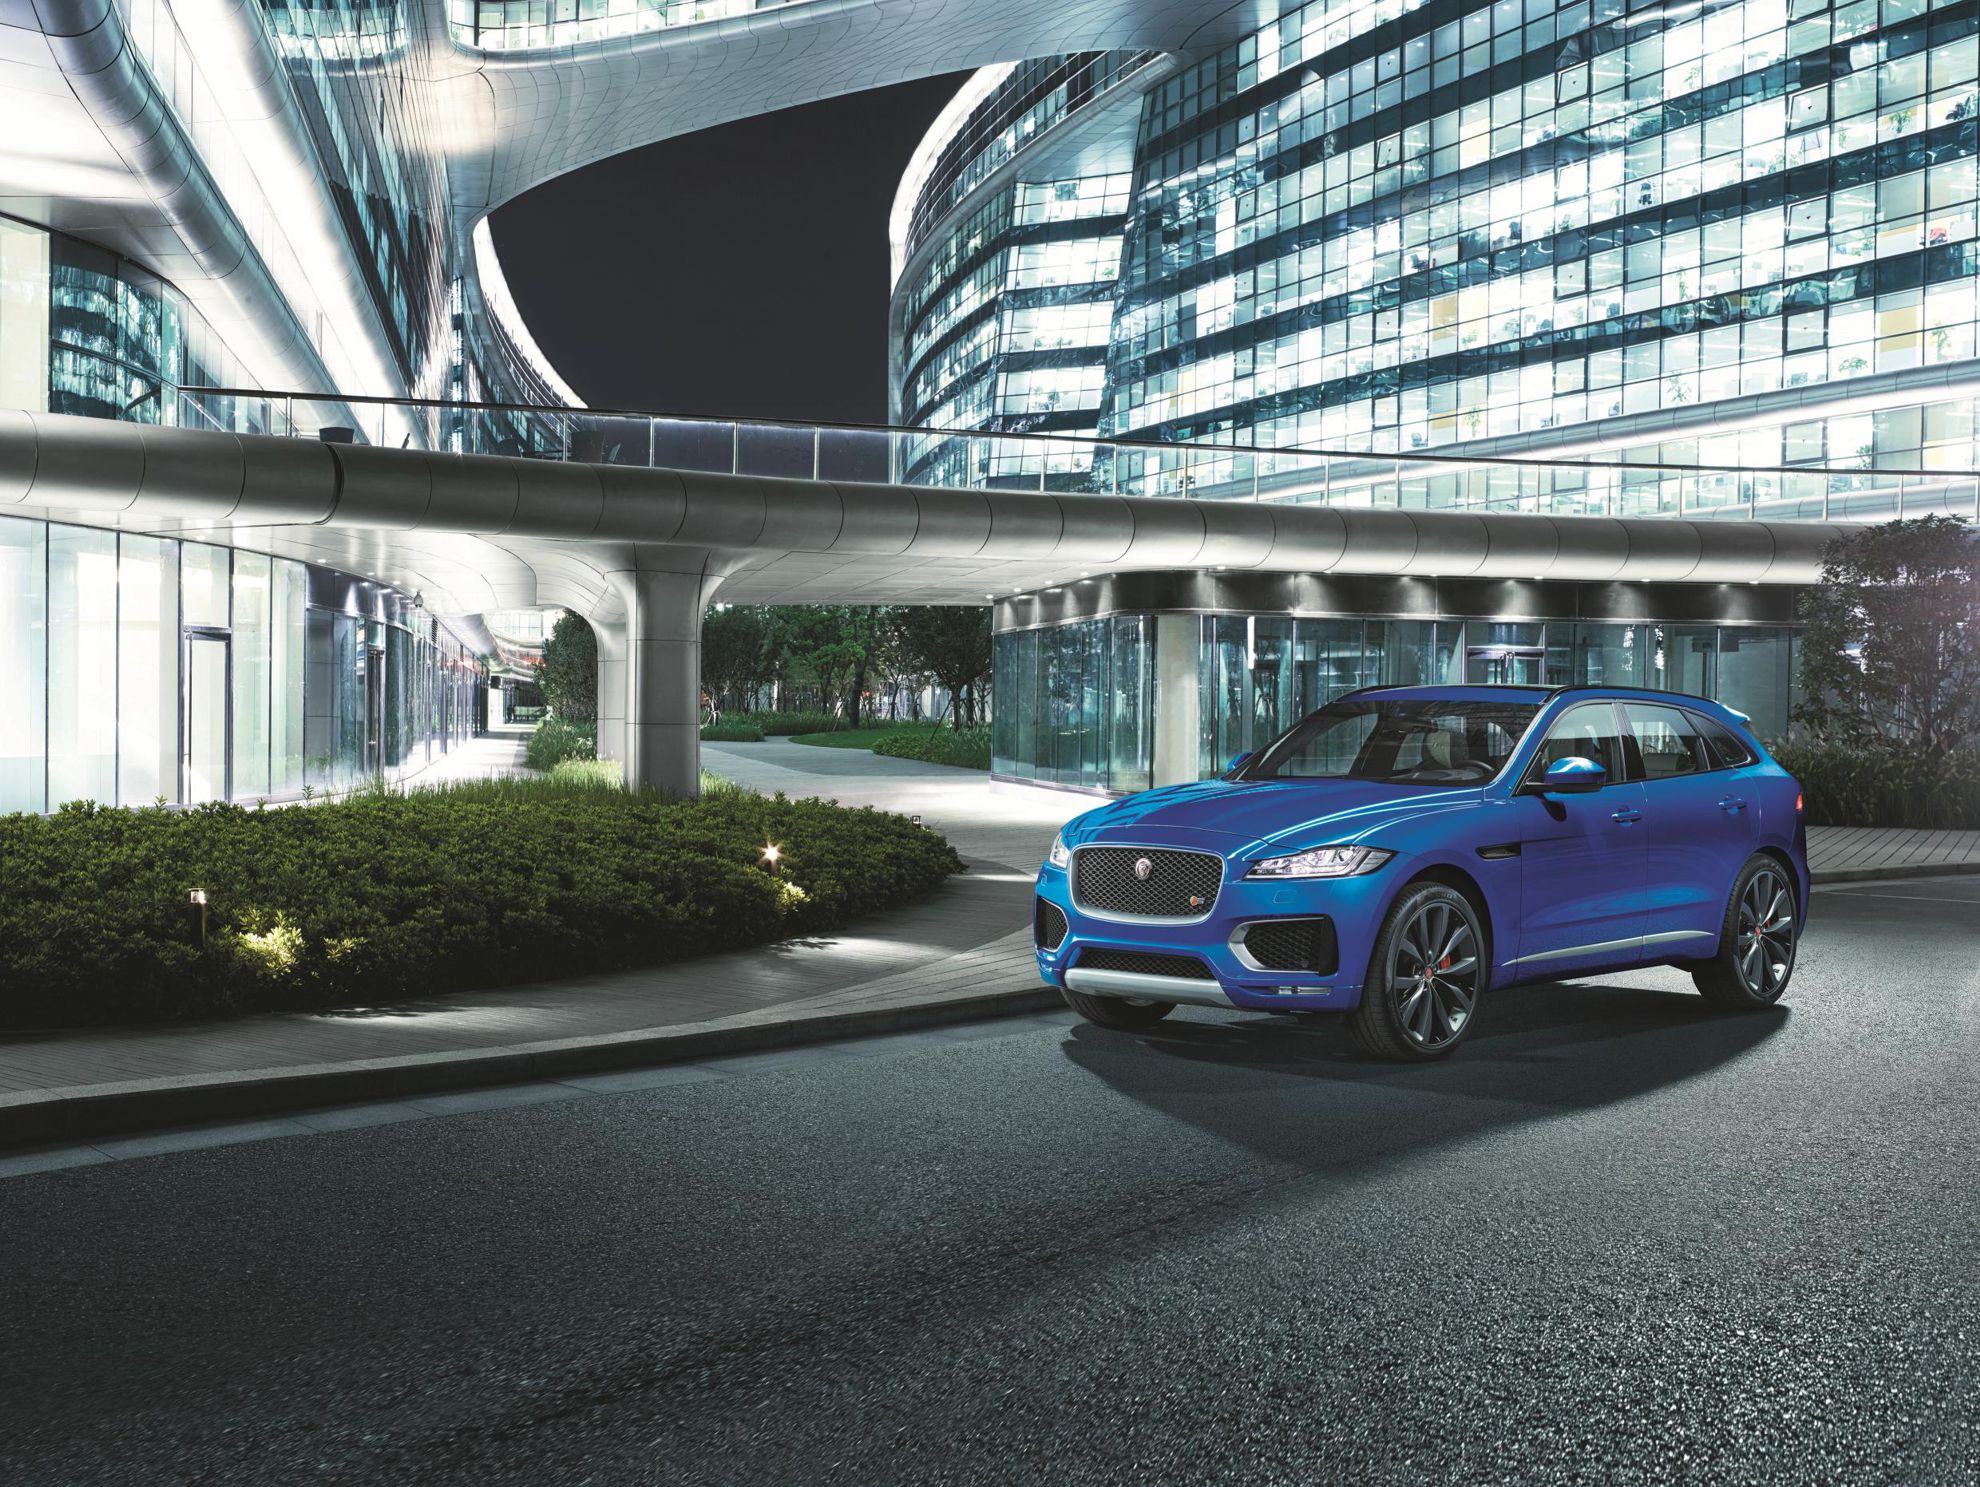 Jaguar Land Rover launches F-PACE to the world